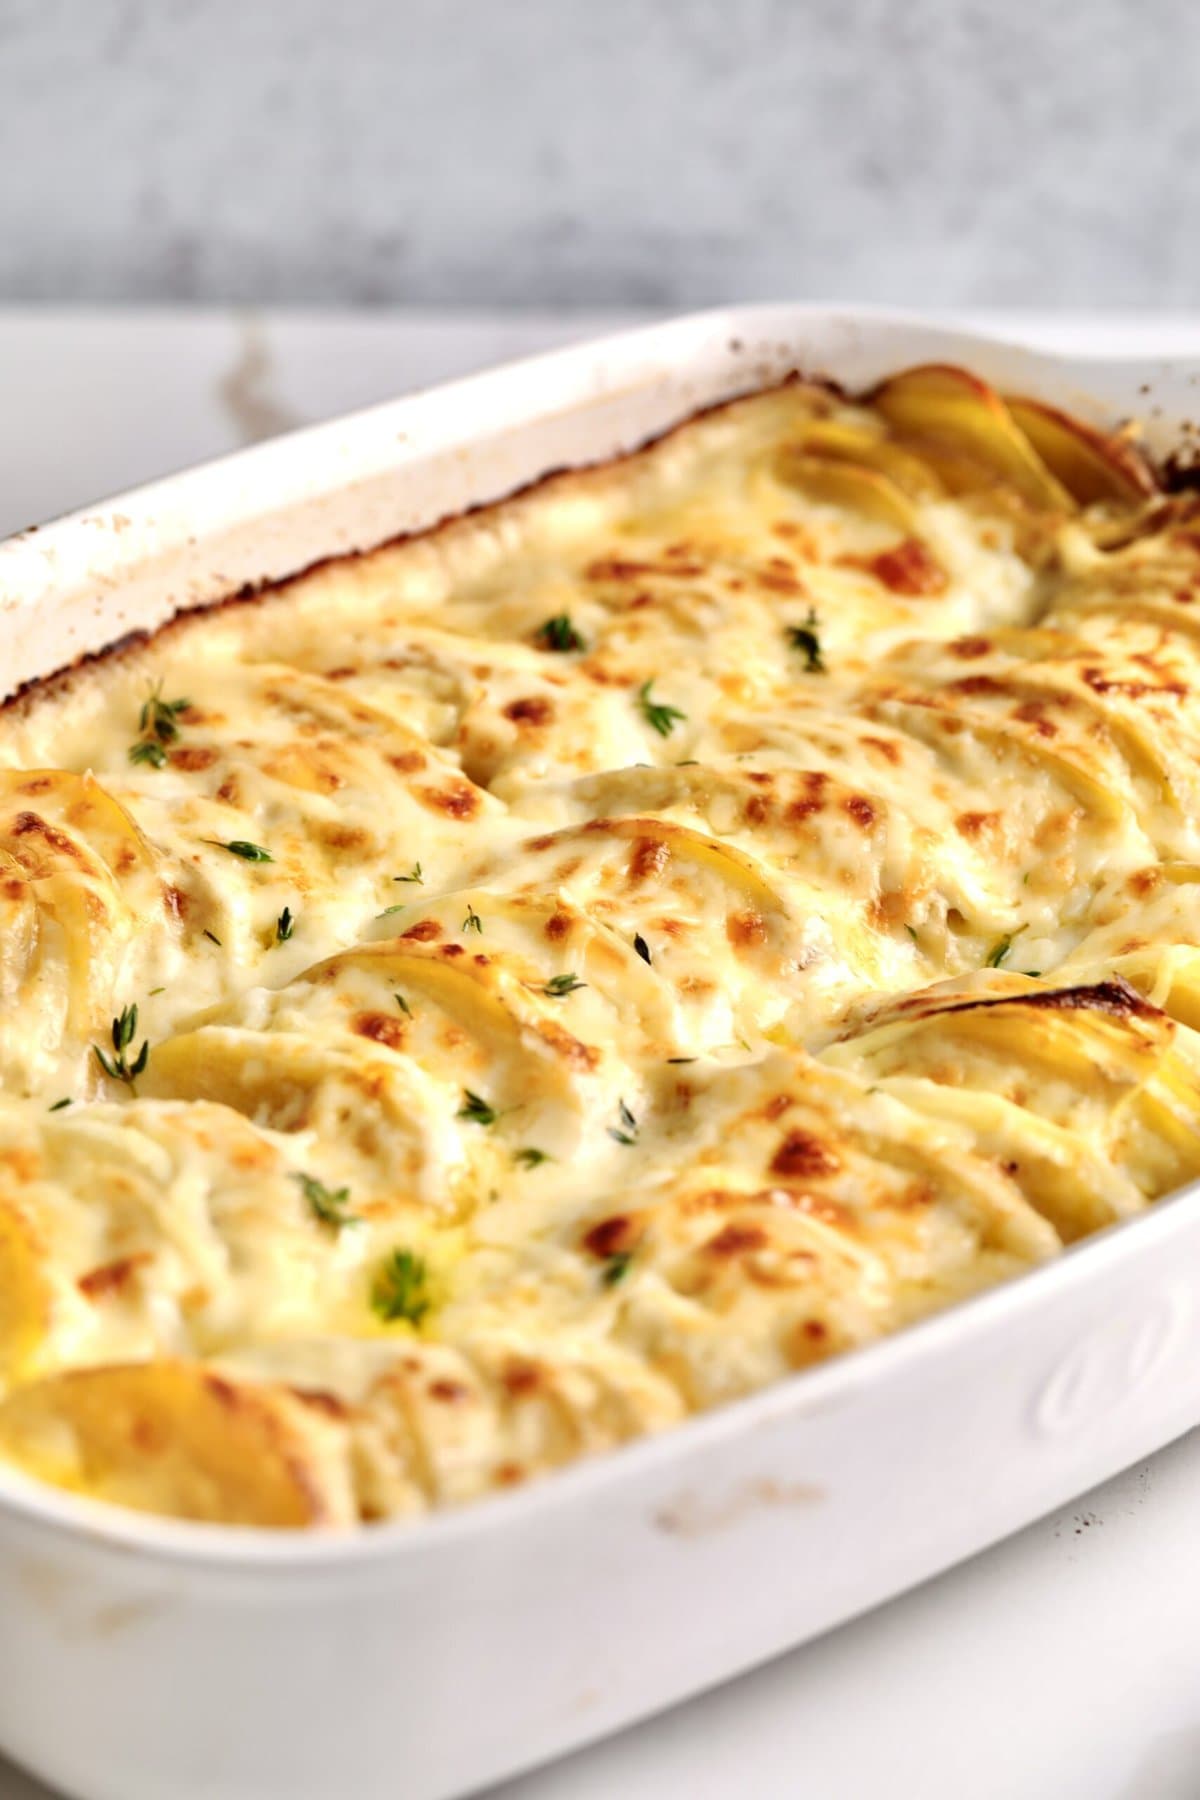 creamy au gratin potatoes in a a baking dish ready to serve.